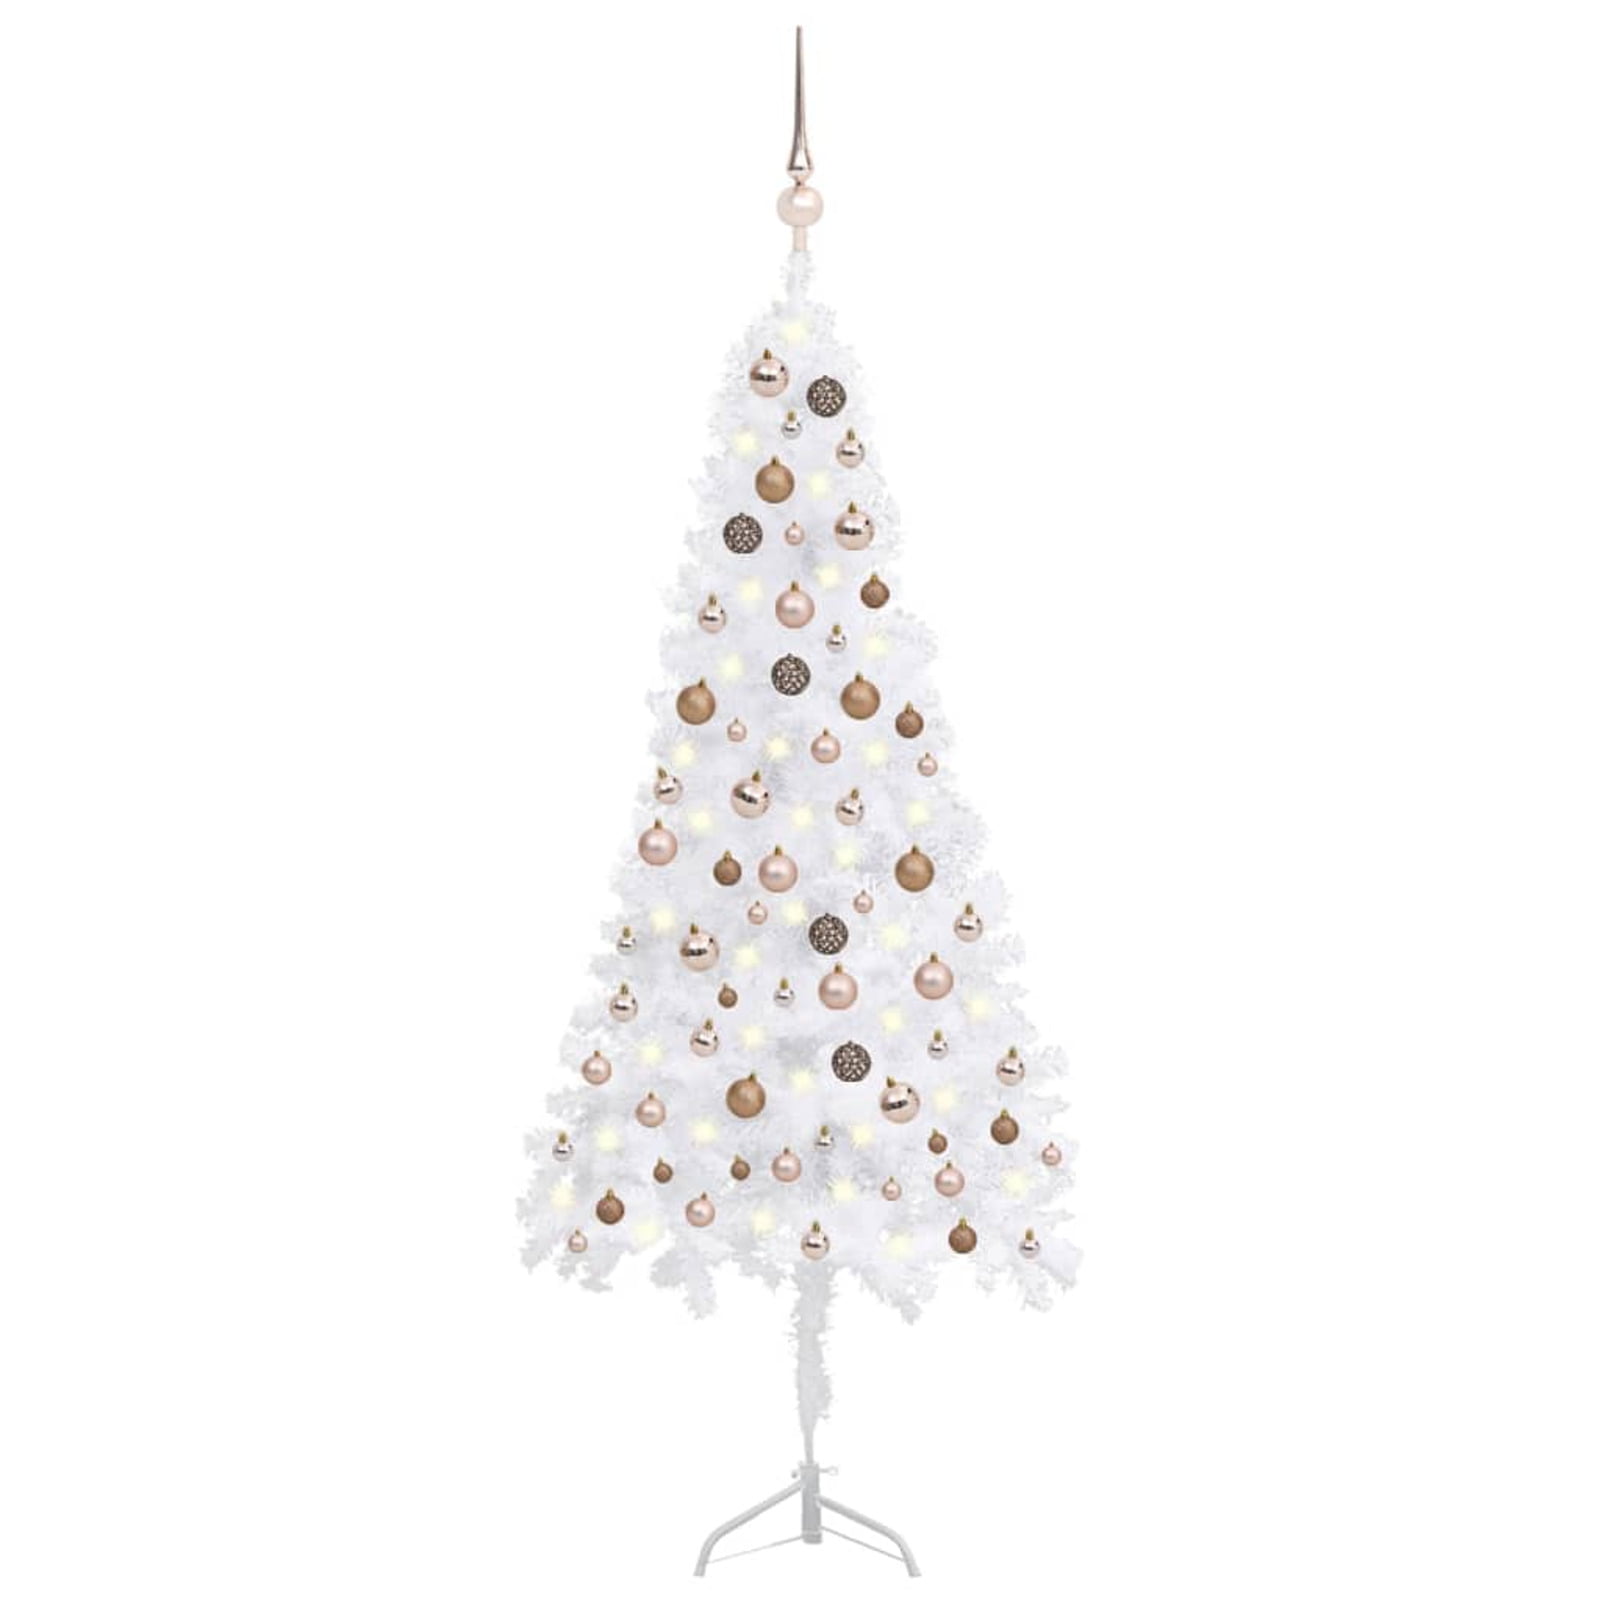 Details about   PVC Mini Artificial Christmas Tree LED Light Outdoor Home Desk Lamp Decors Gifts 